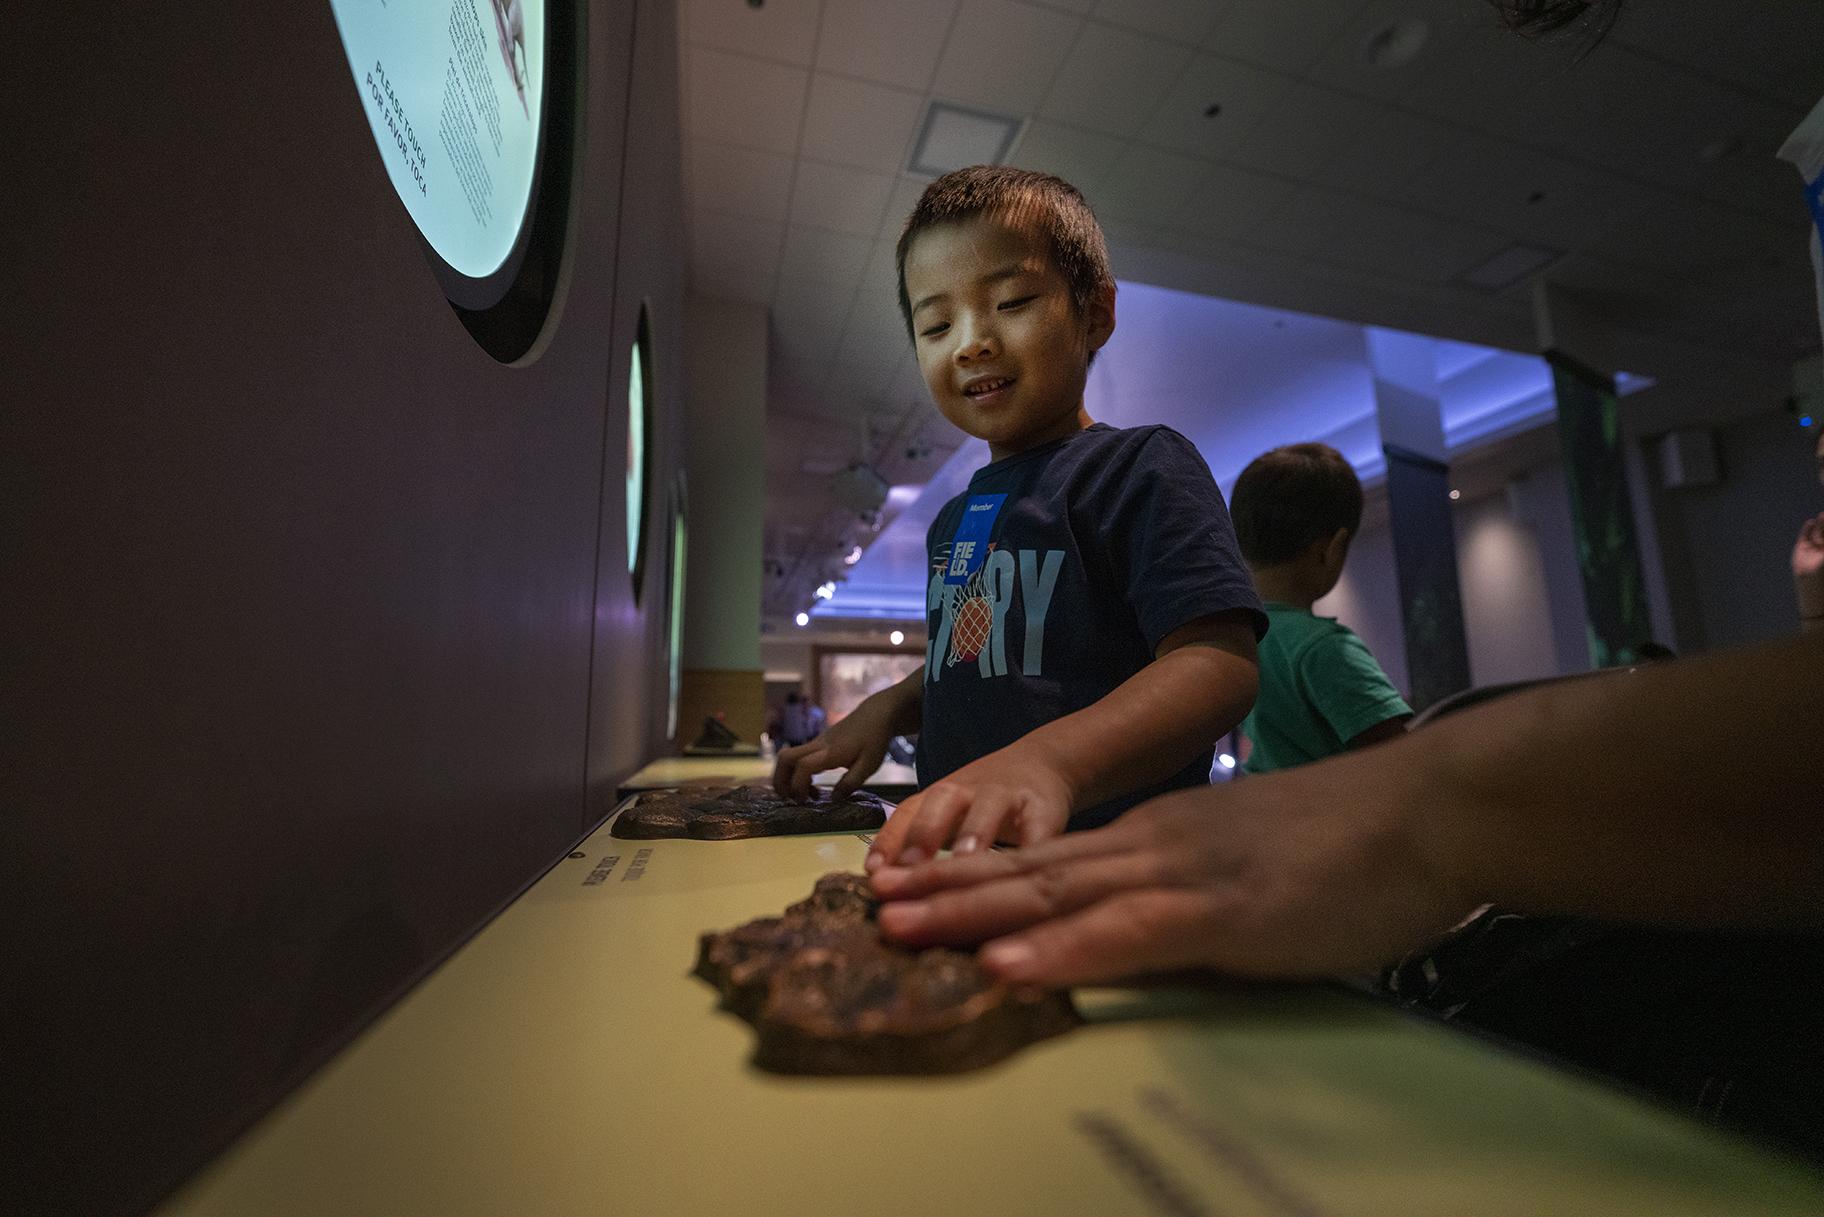 Visitors can feel how the skin textures of various dinosaurs – including the T. Rex and Triceratops – differed as part of new multisensory stations at the Field Museum. (Martin Baumgaertner / Field Museum)